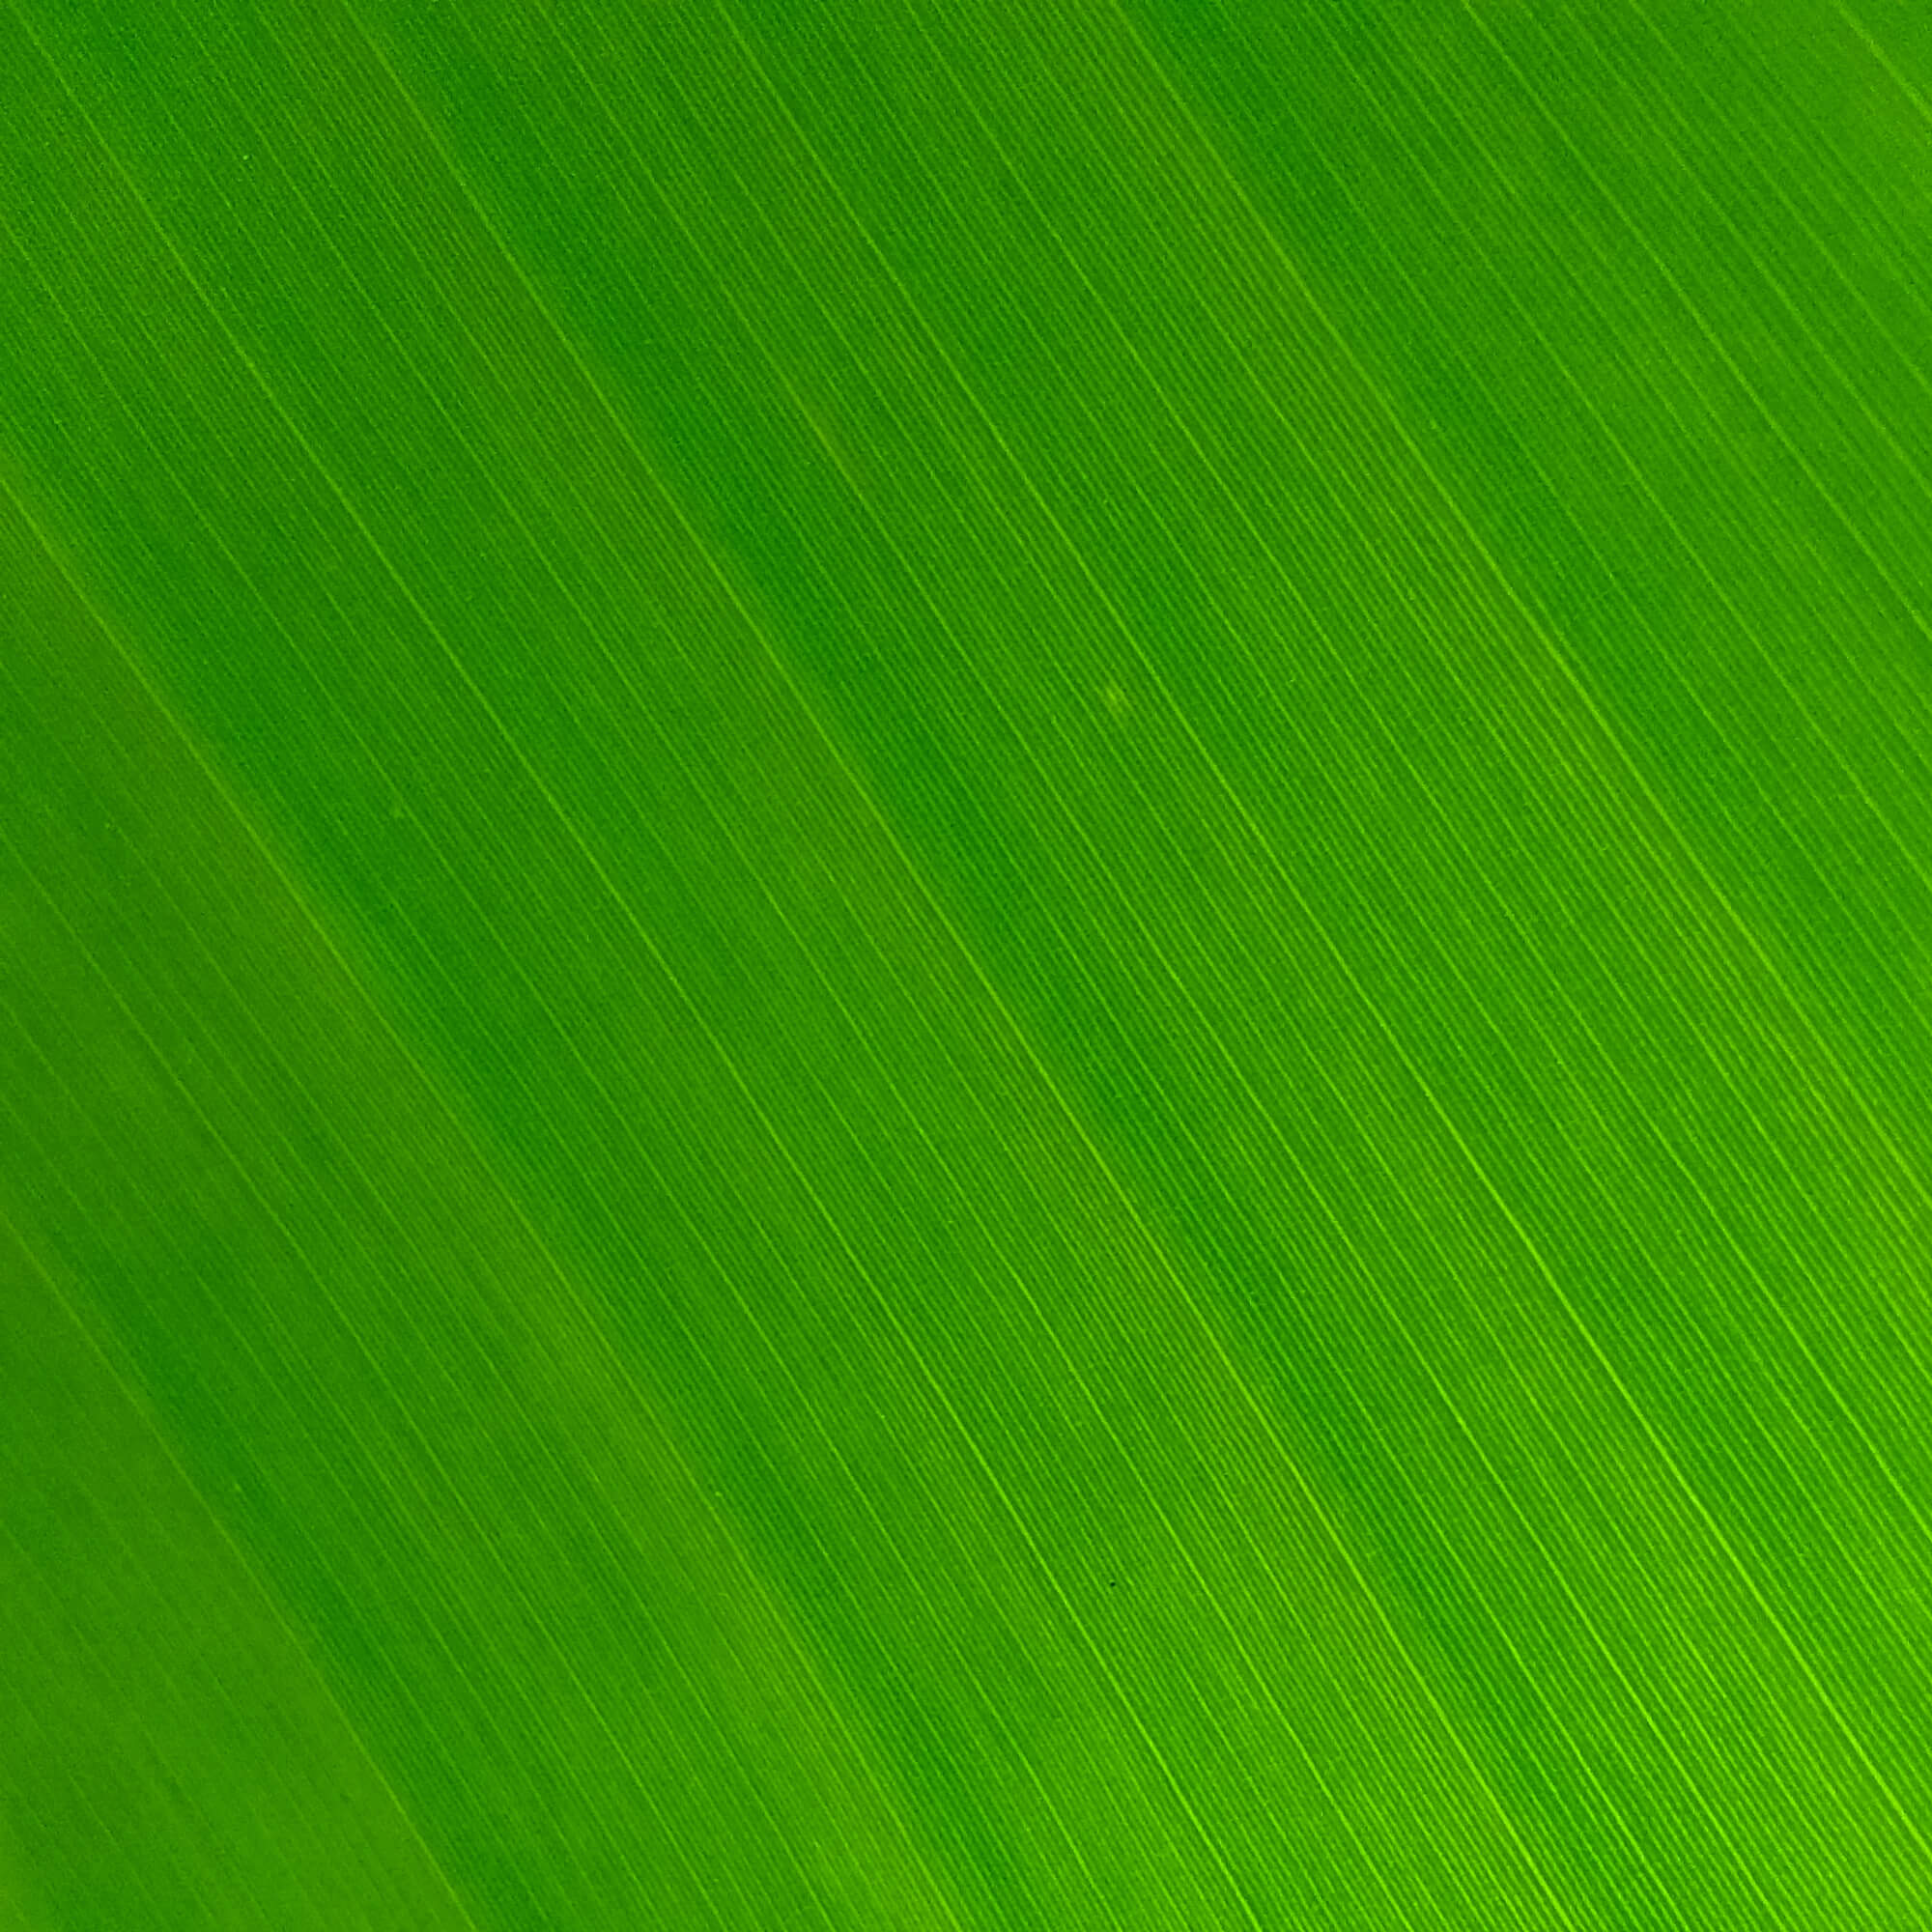 Green Wallpaper Photos Download The BEST Free Green Wallpaper Stock Photos   HD Images